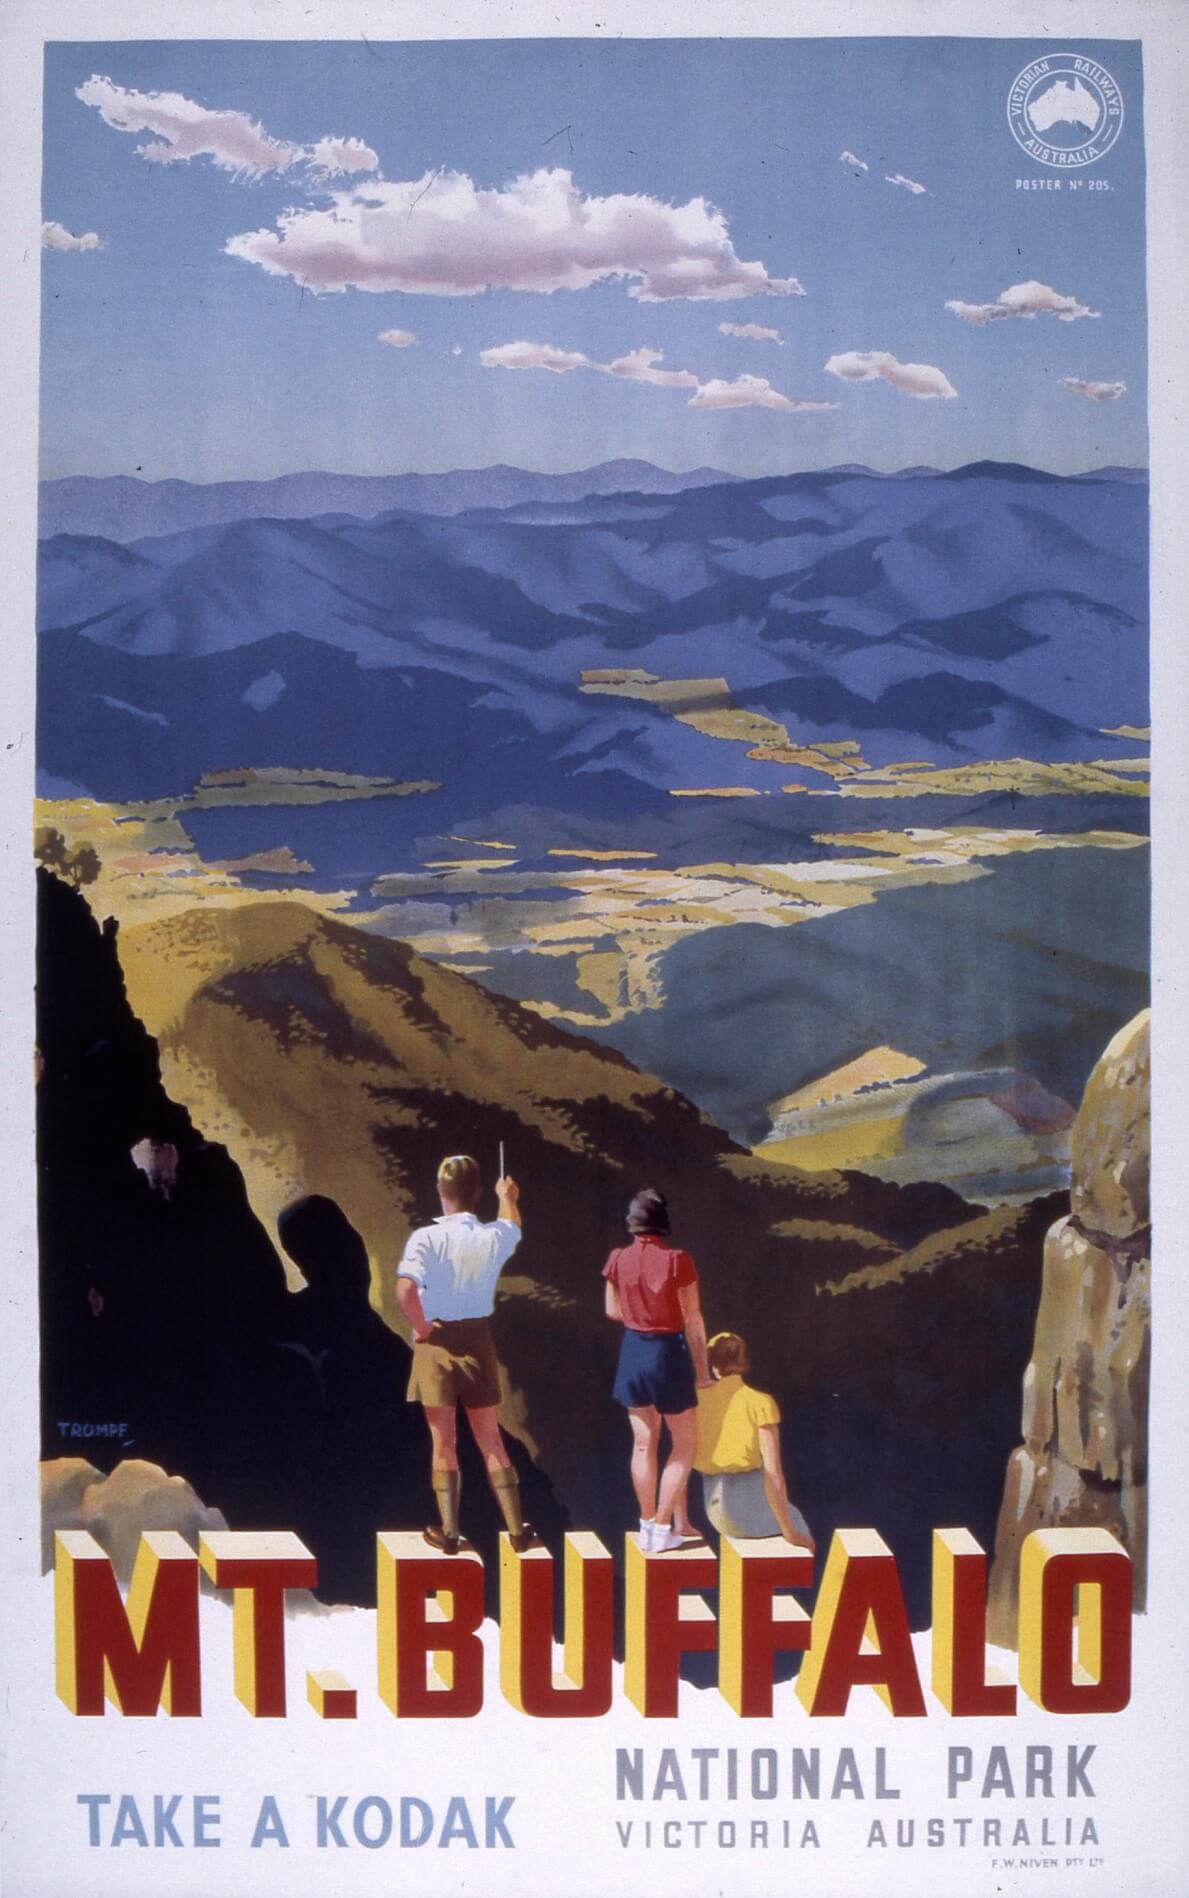 Travel poster for "Mt Buffalo National Park". Drawn image shows a view over a valley to mountains. Three figures appear in the foreground, a man pointing, a woman standing and another sitting.